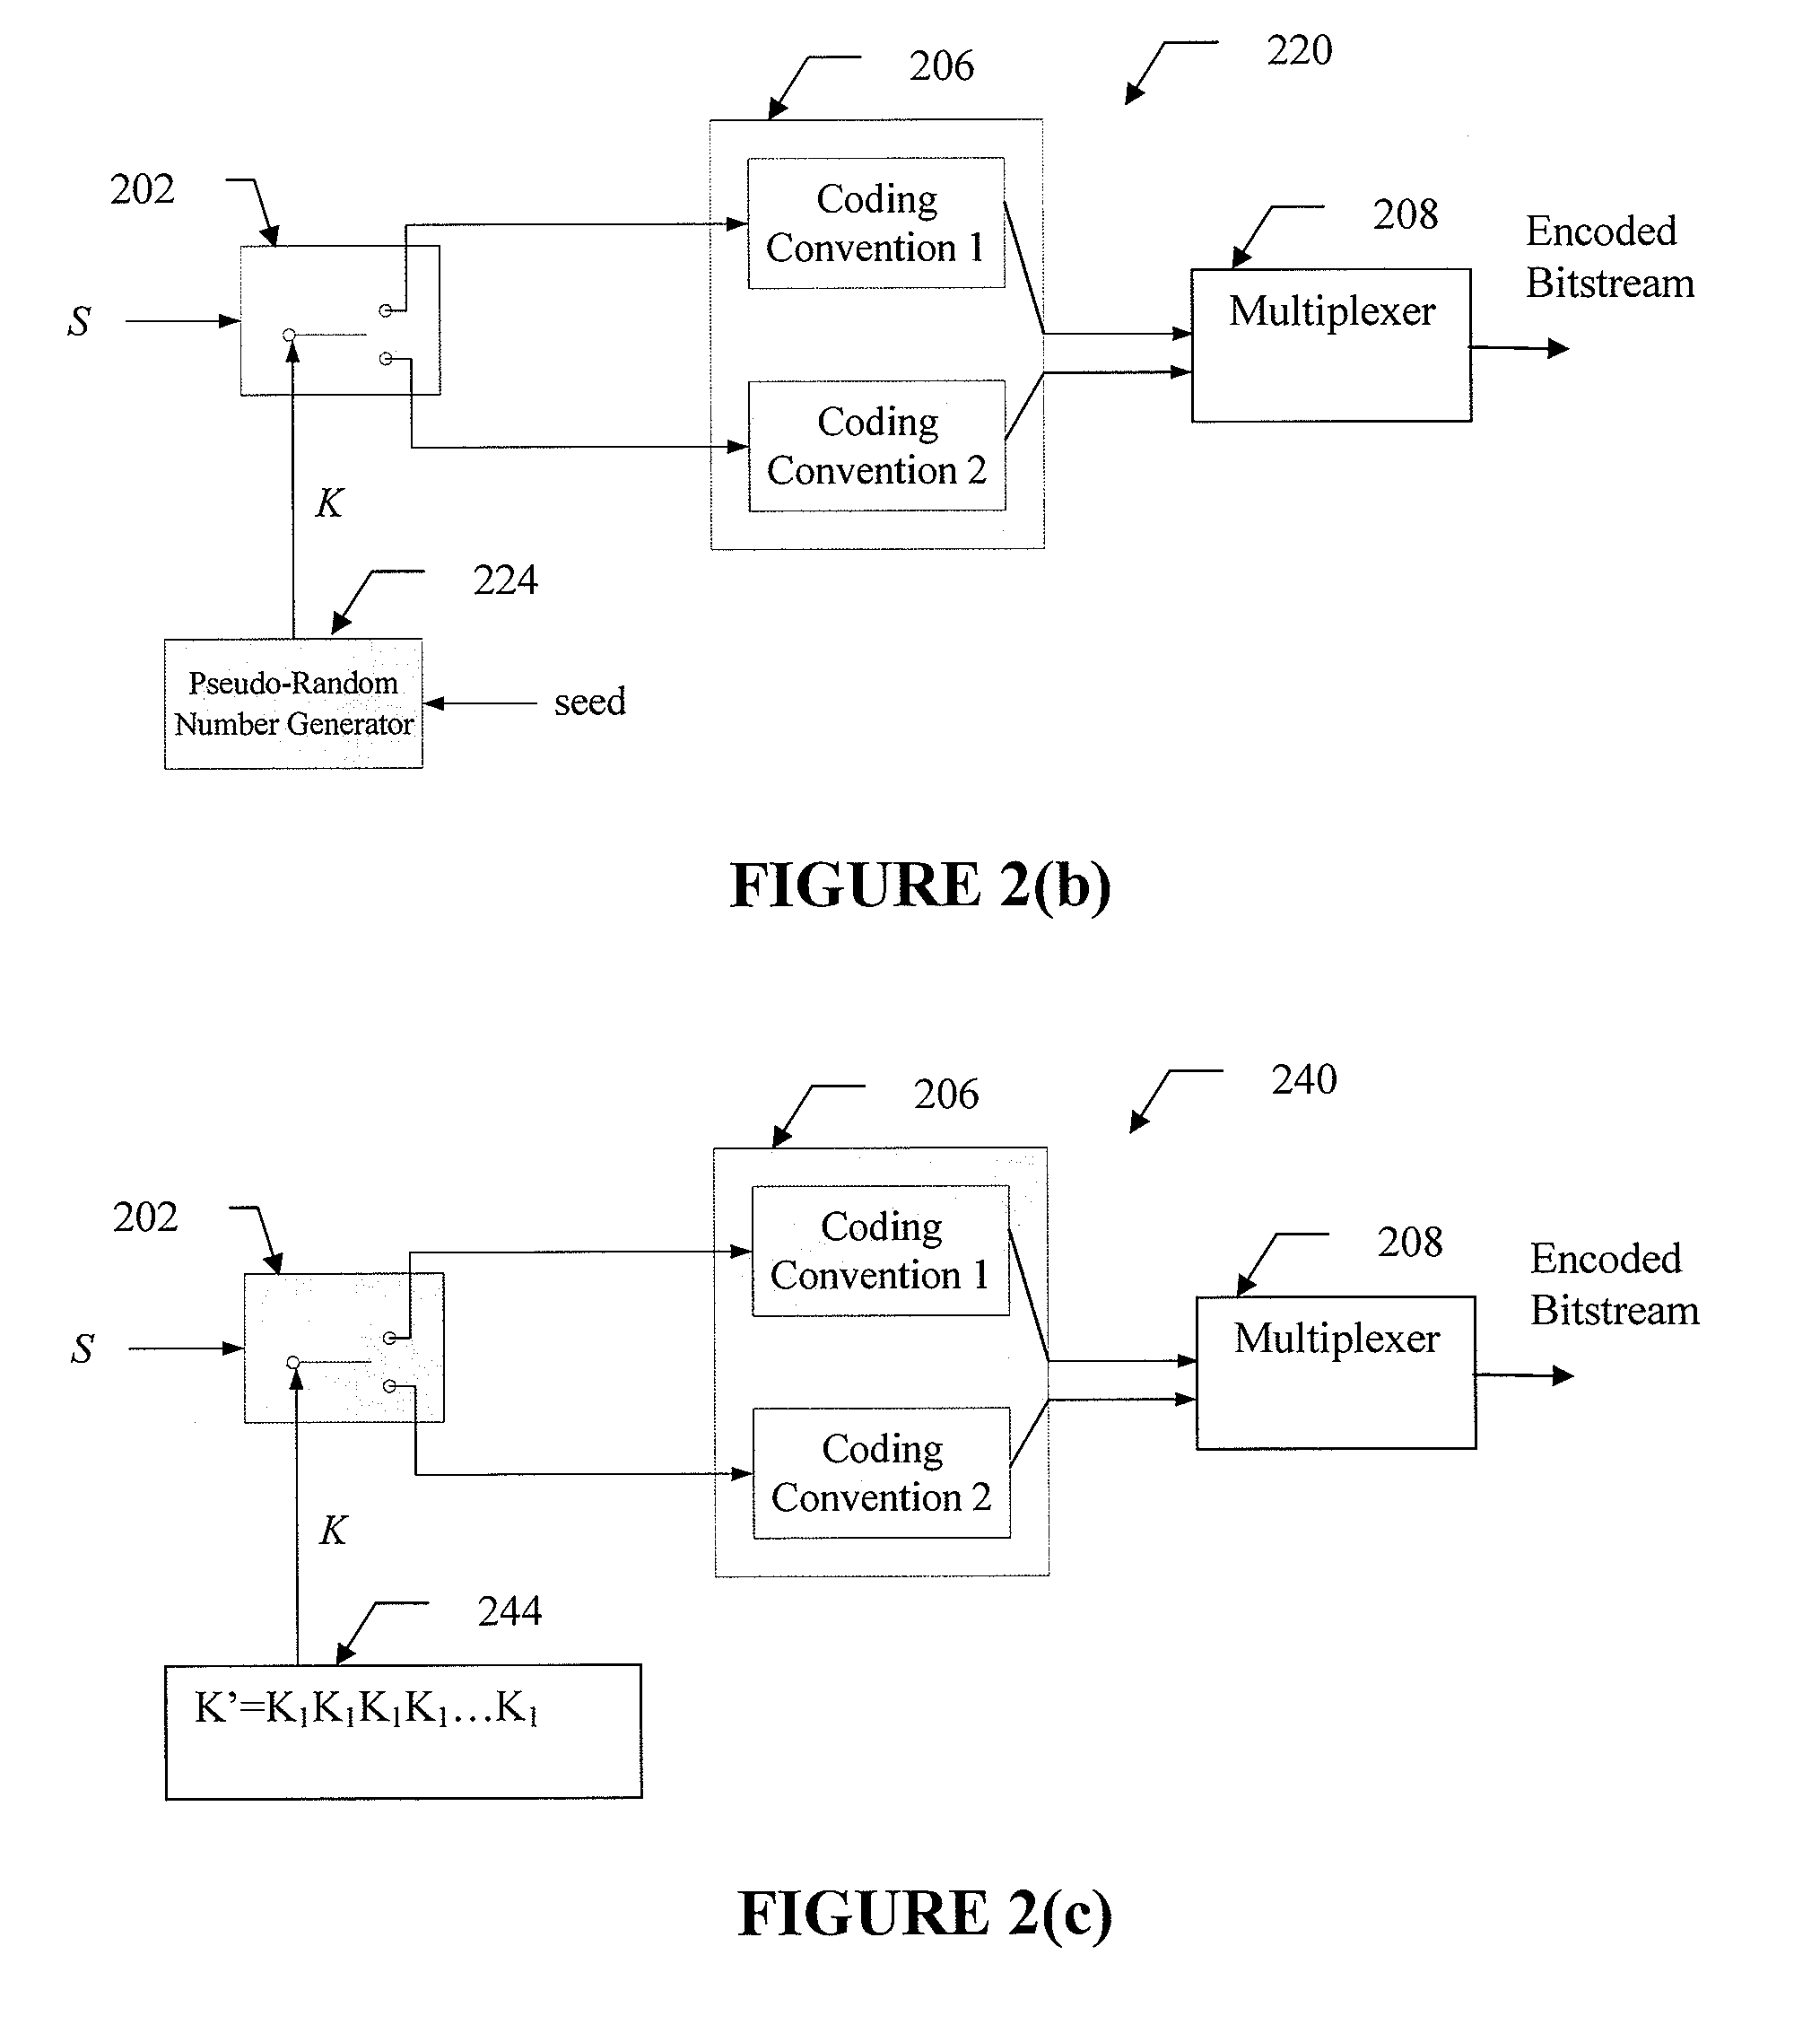 Method and system for encoding multimedia content based on secure coding schemes using stream cipher